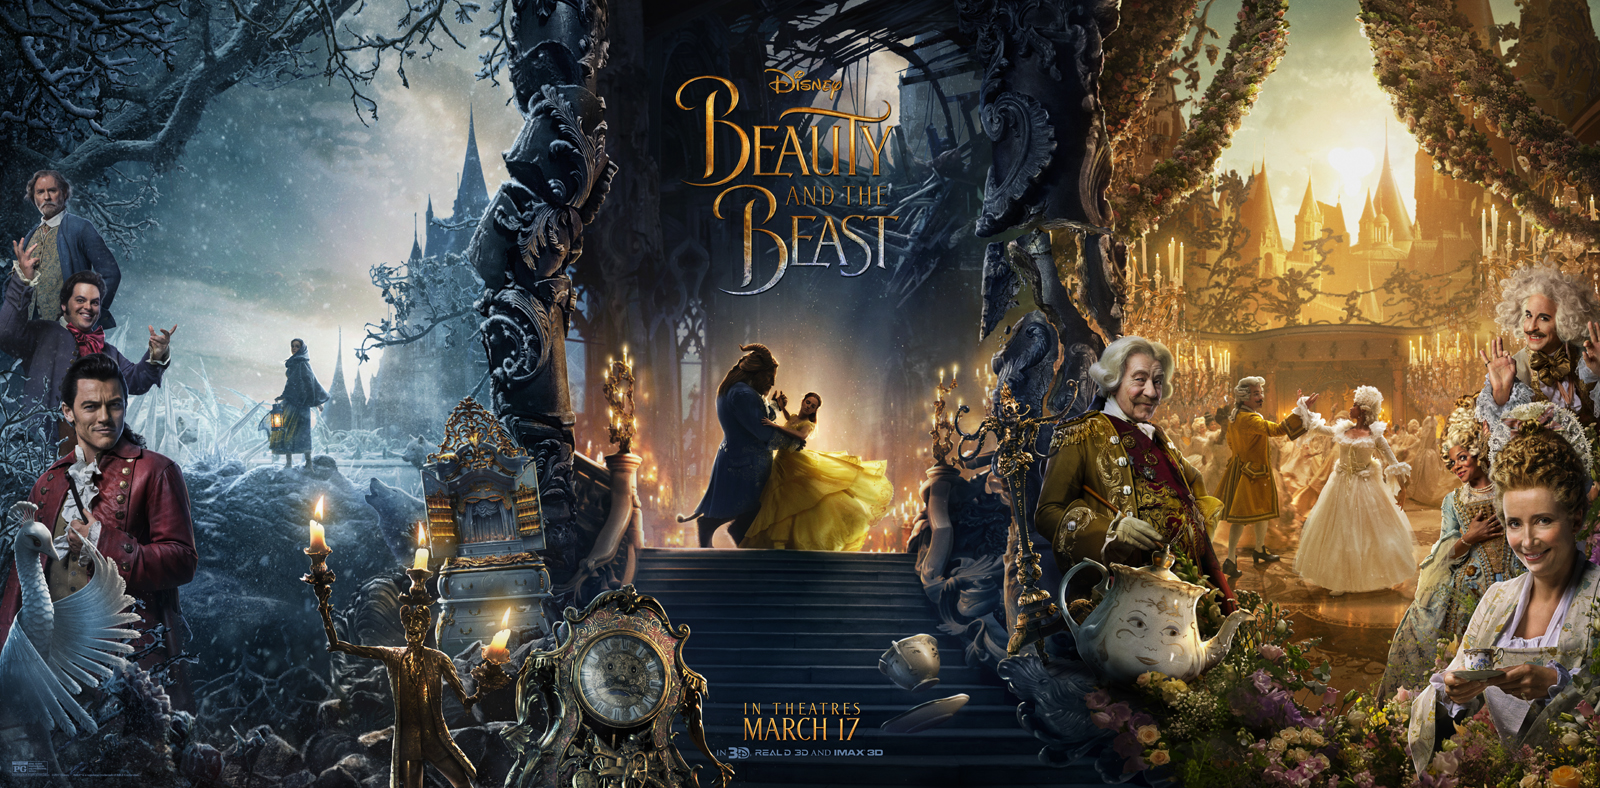 Disney’s Beauty and the Beast Review